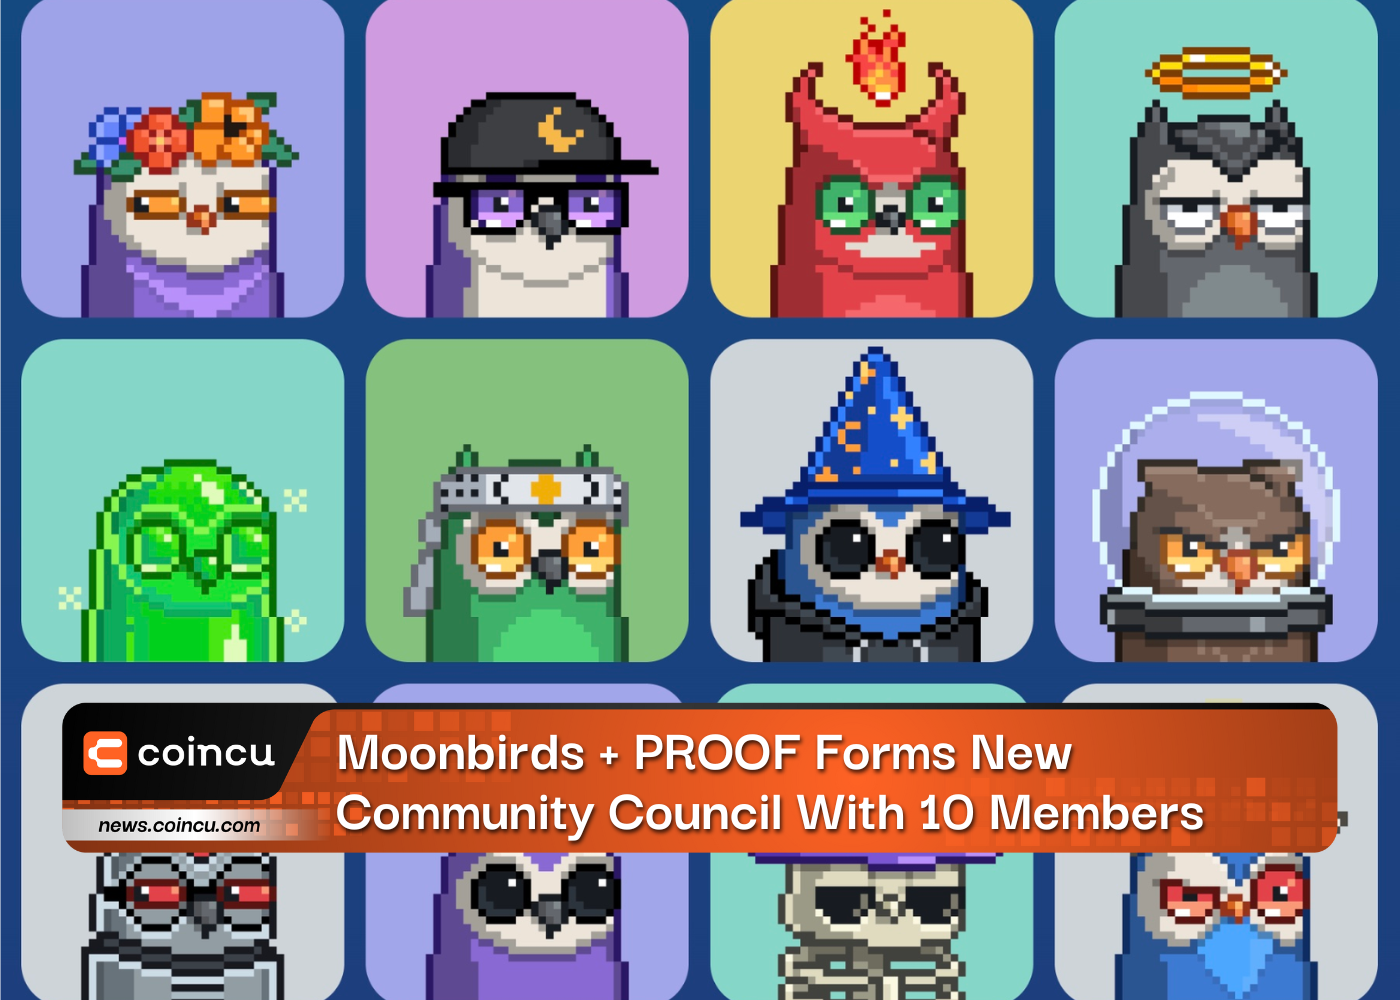 Moonbirds + PROOF Forms New Community Council With 10 Members